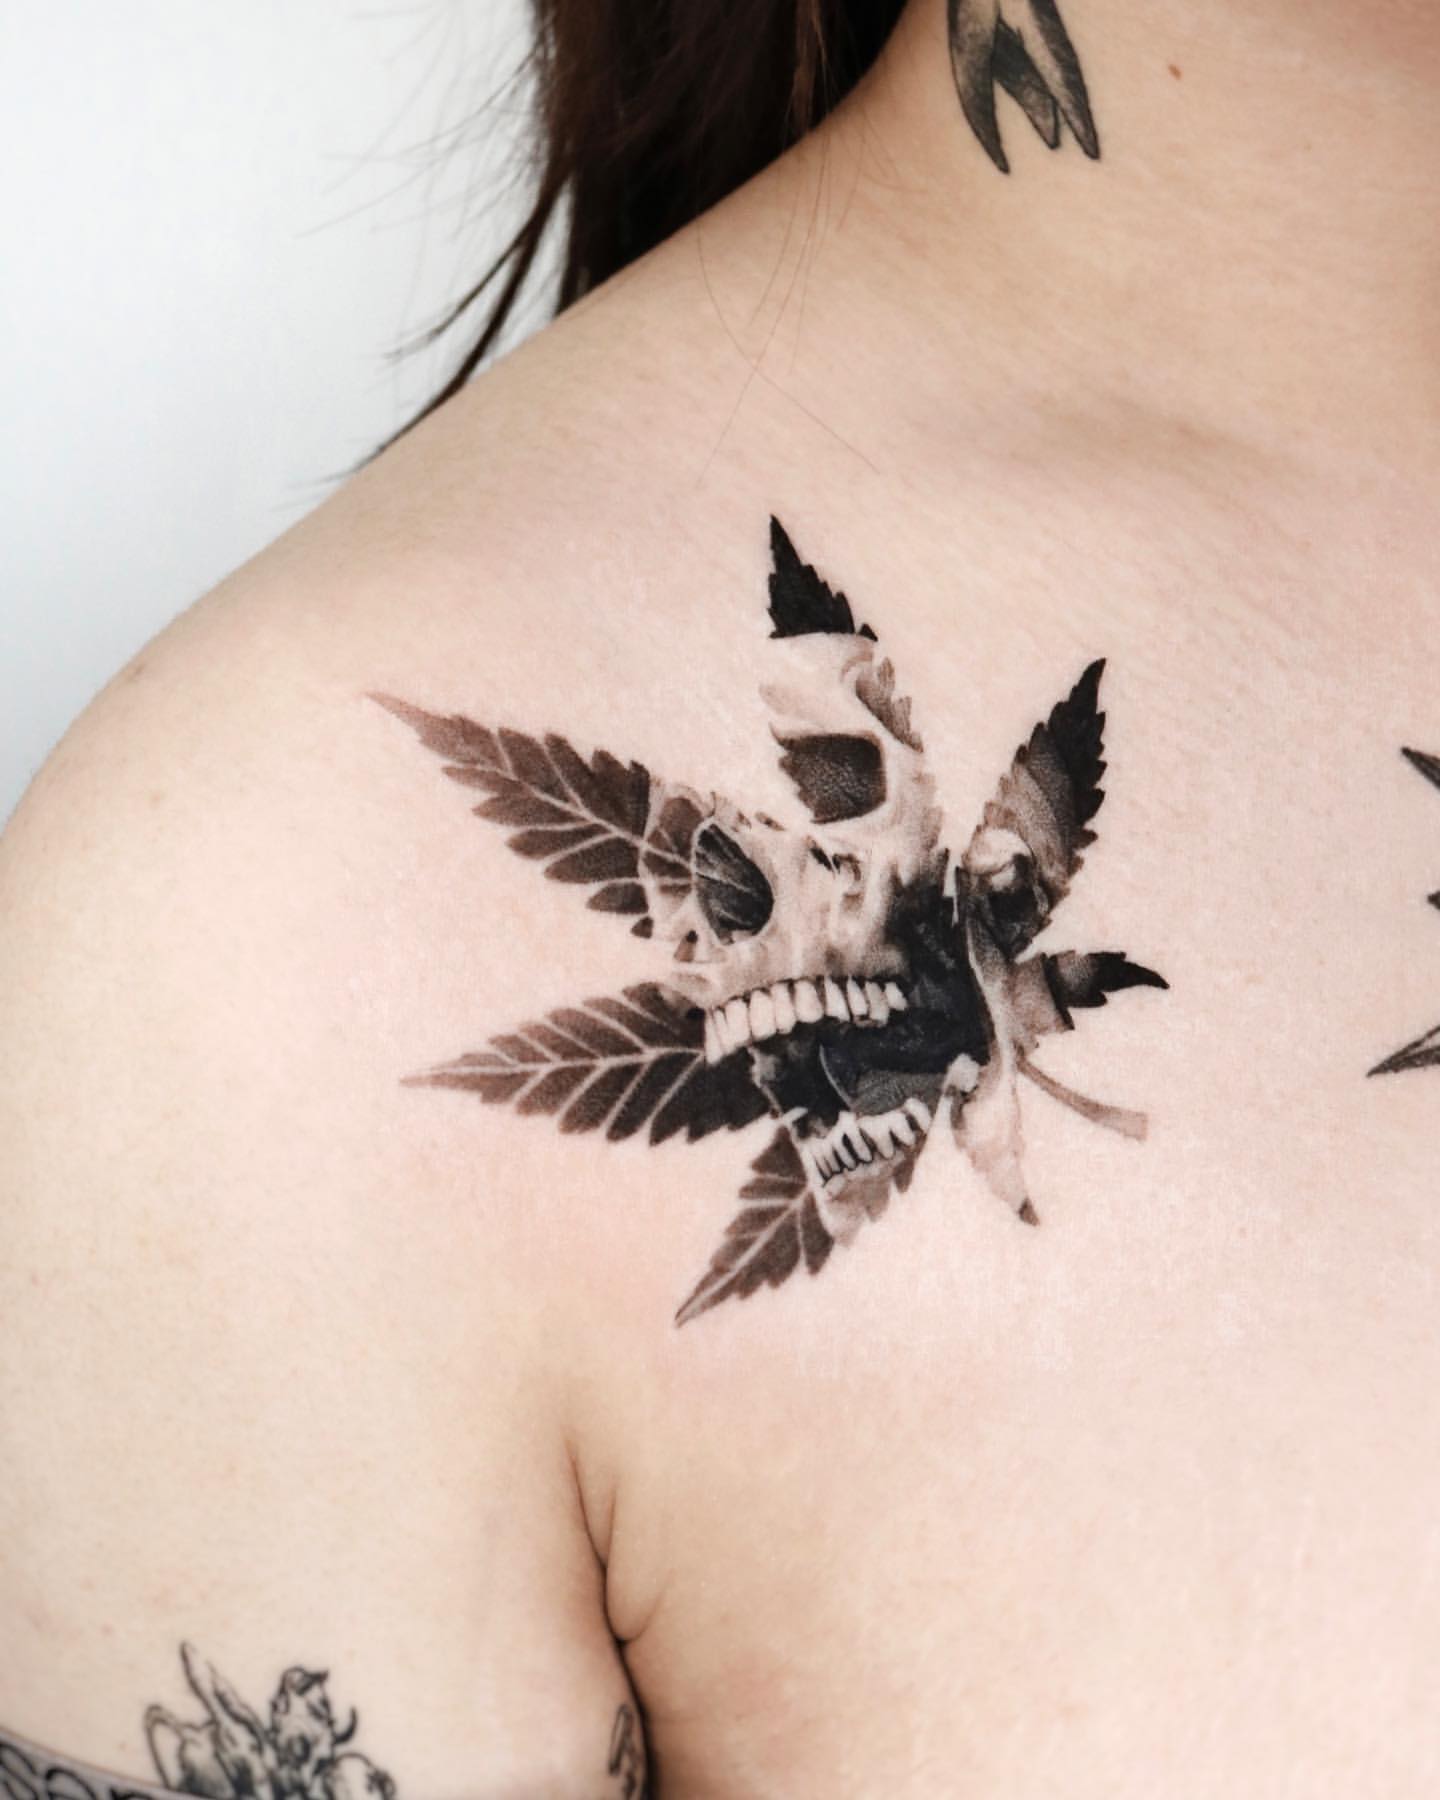 17 Highly-Rated Weed Tattoo Ideas for Men & Women in 2023